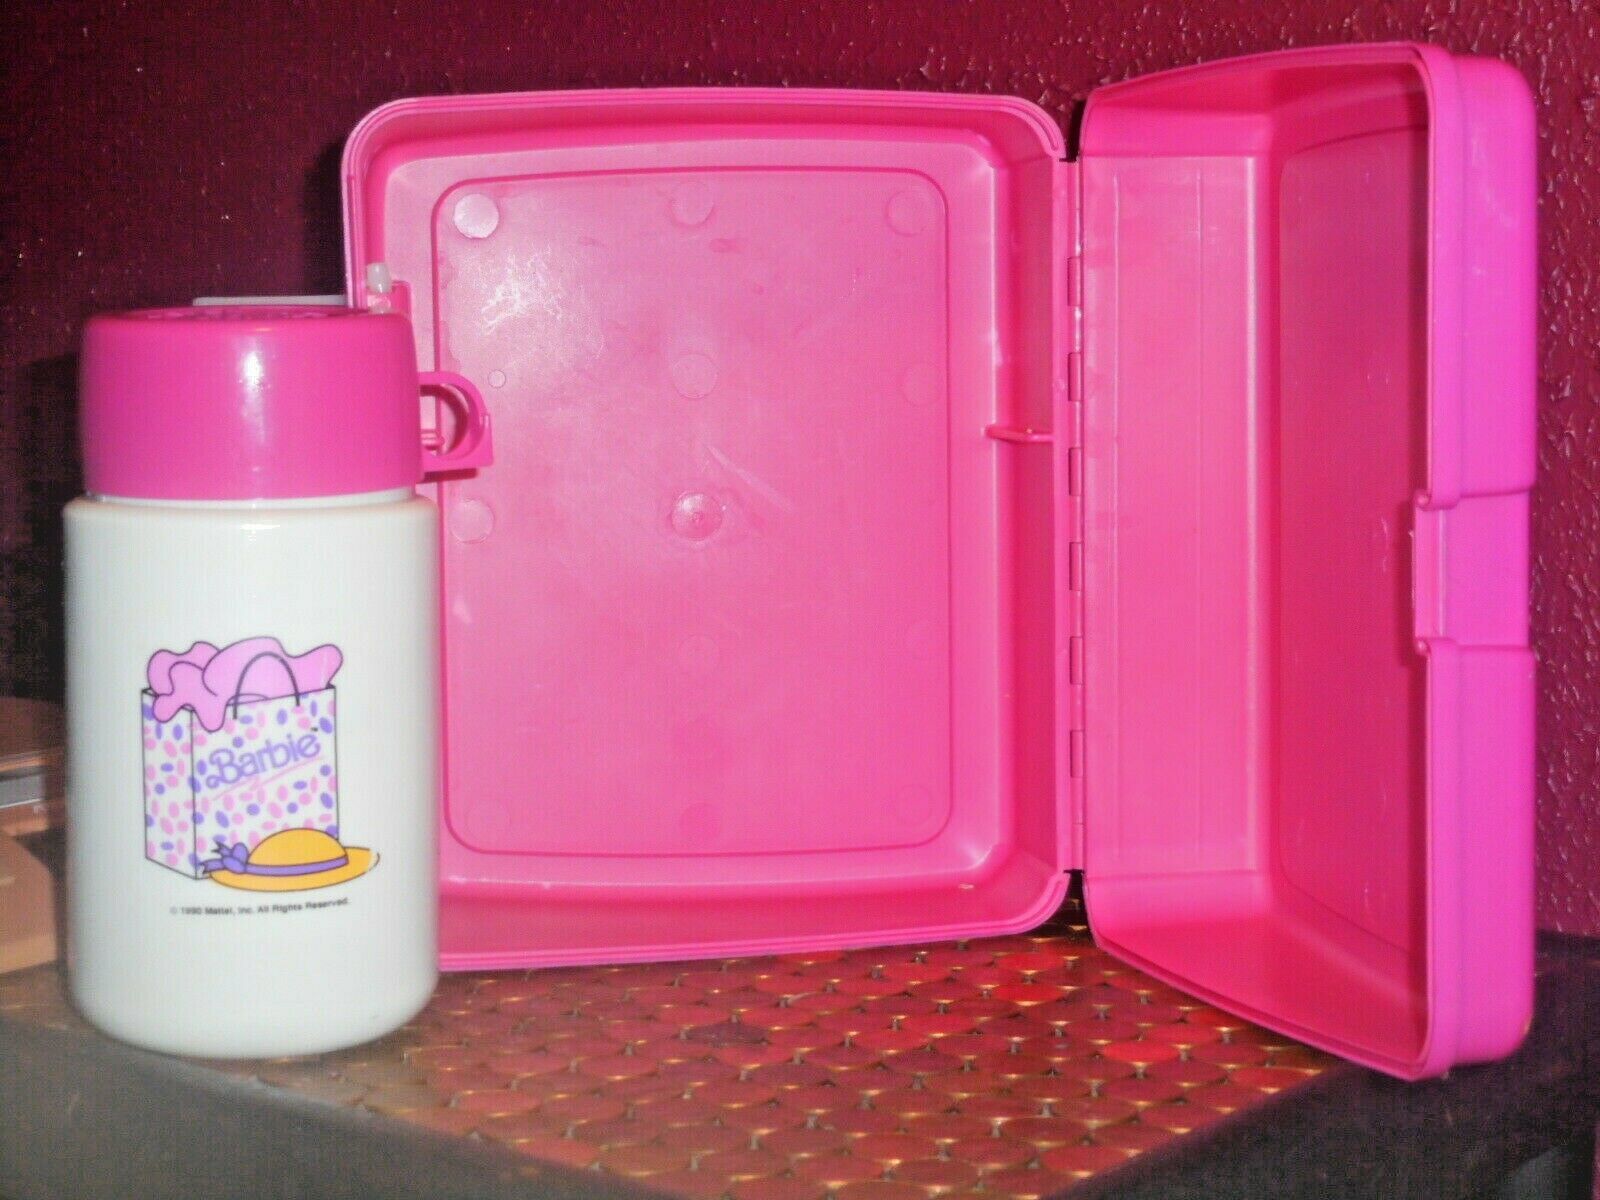 Vintage Barbie Thermos Barbie Thermos With Hearts Mattel